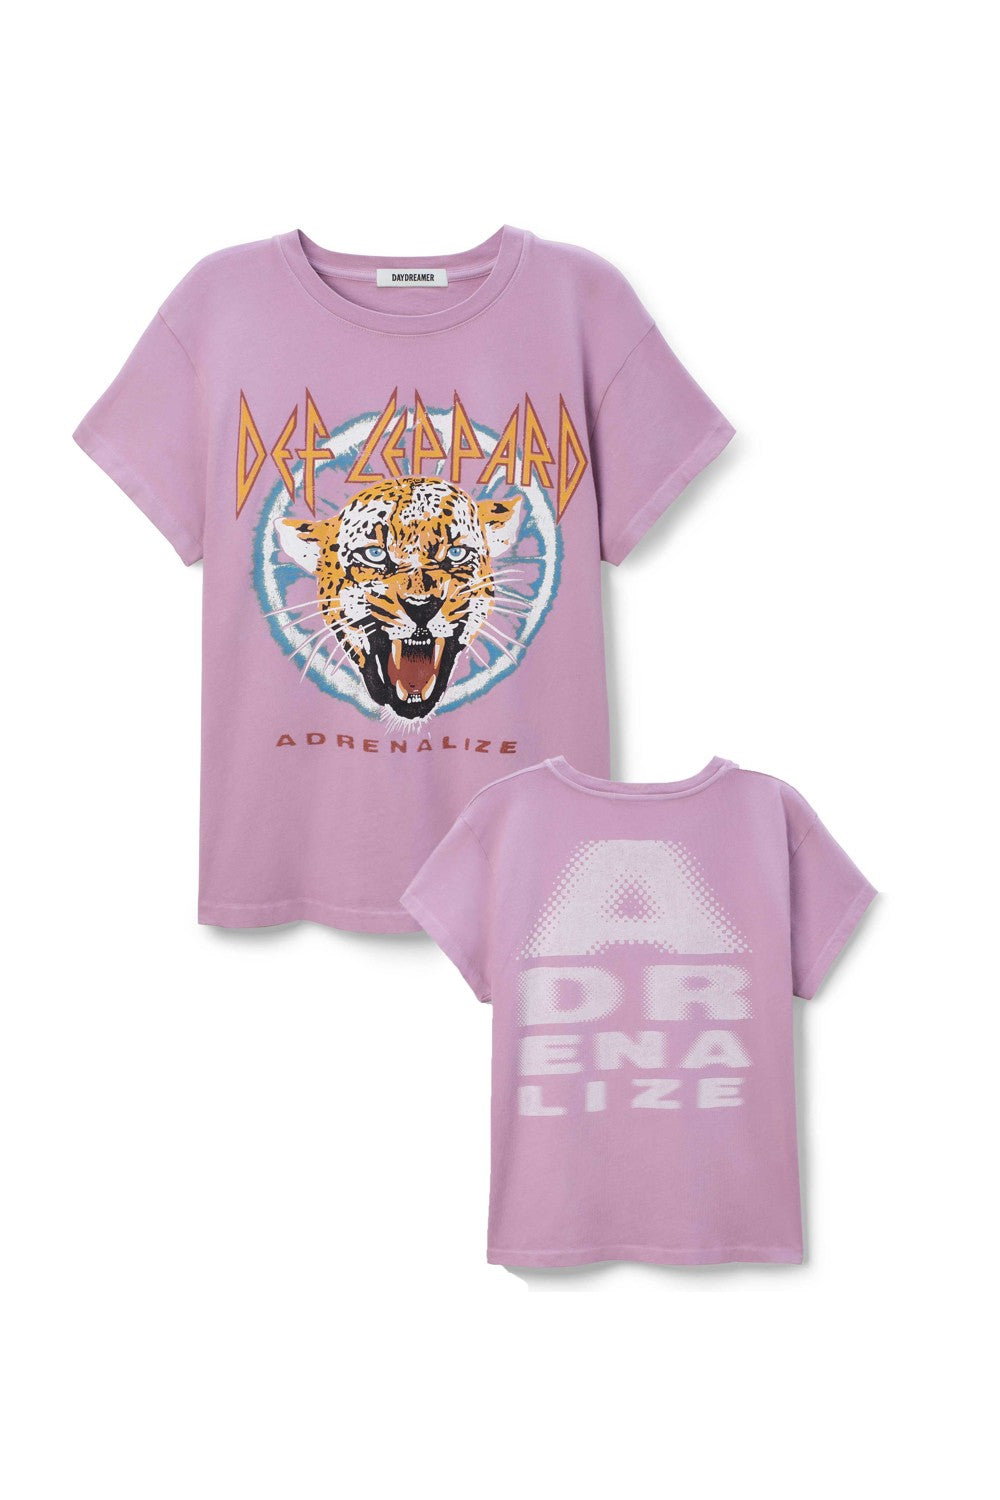 Def Leppard Adrenalize Tour Tee